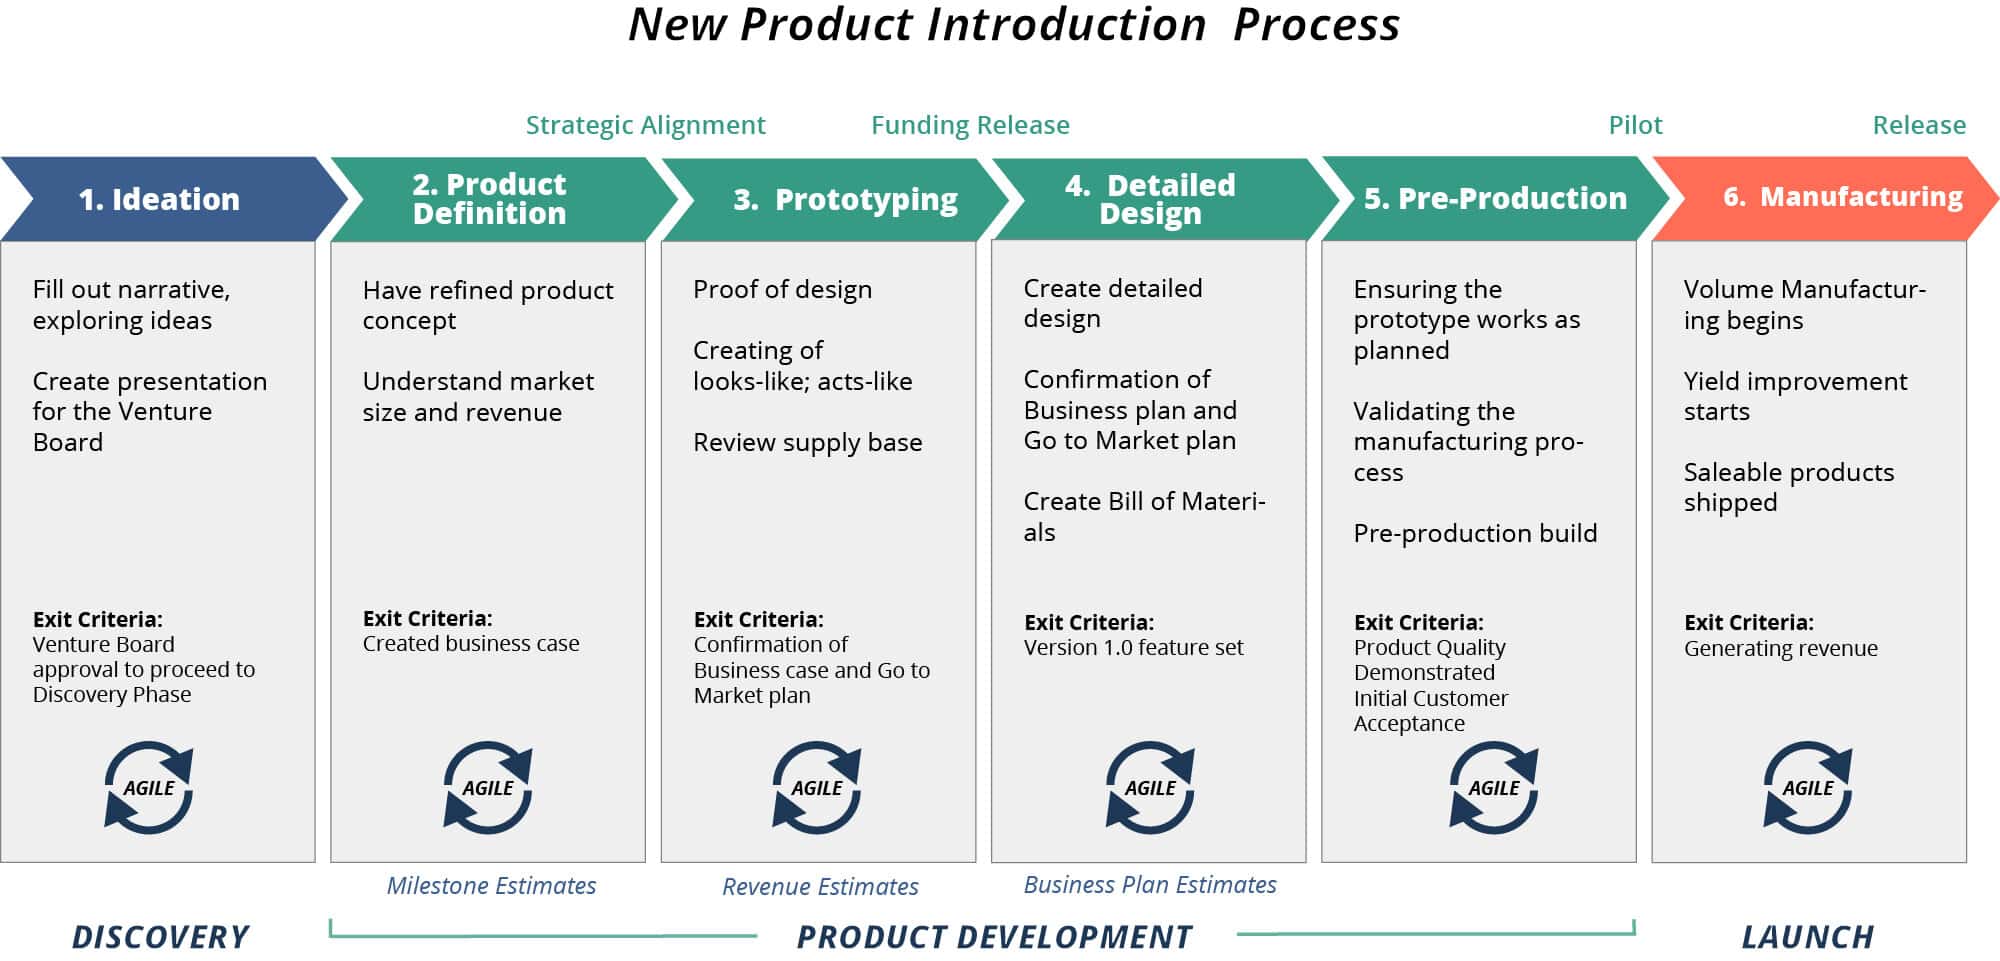 NPI - New Product Introduction, 2023 Definitive Guide